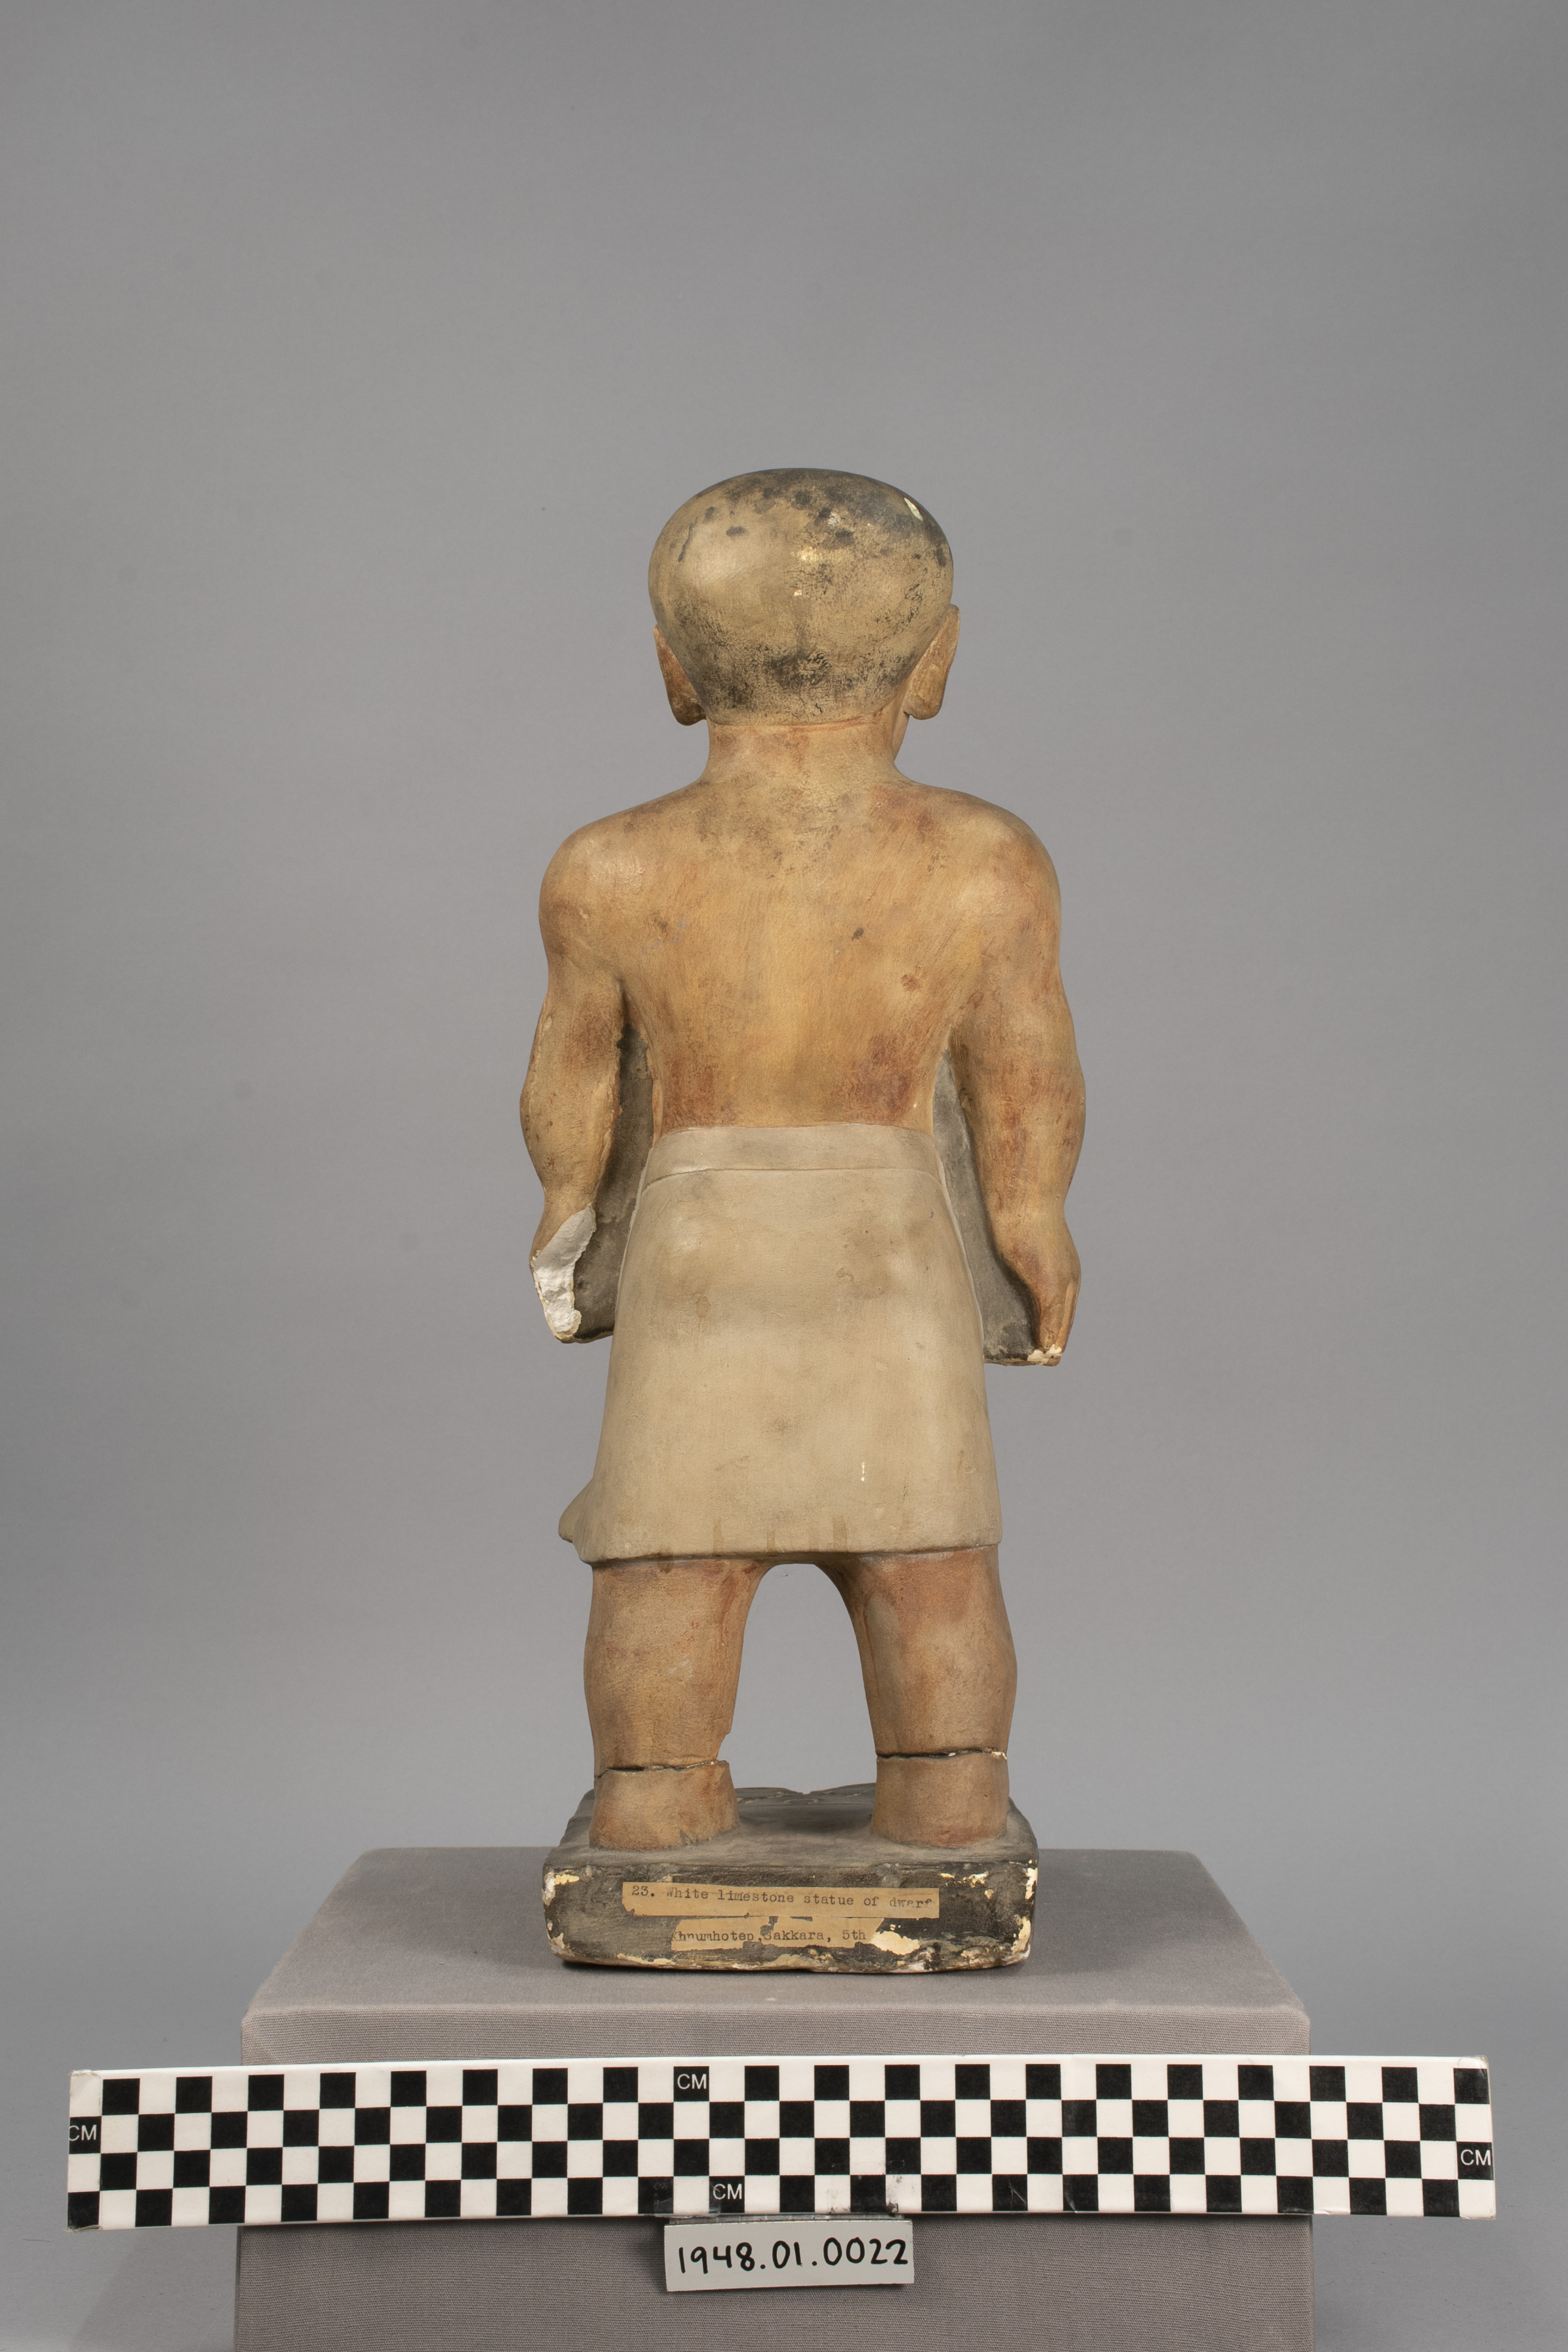 Cairo Egypt pottery plaster cast image figure on the boarder of